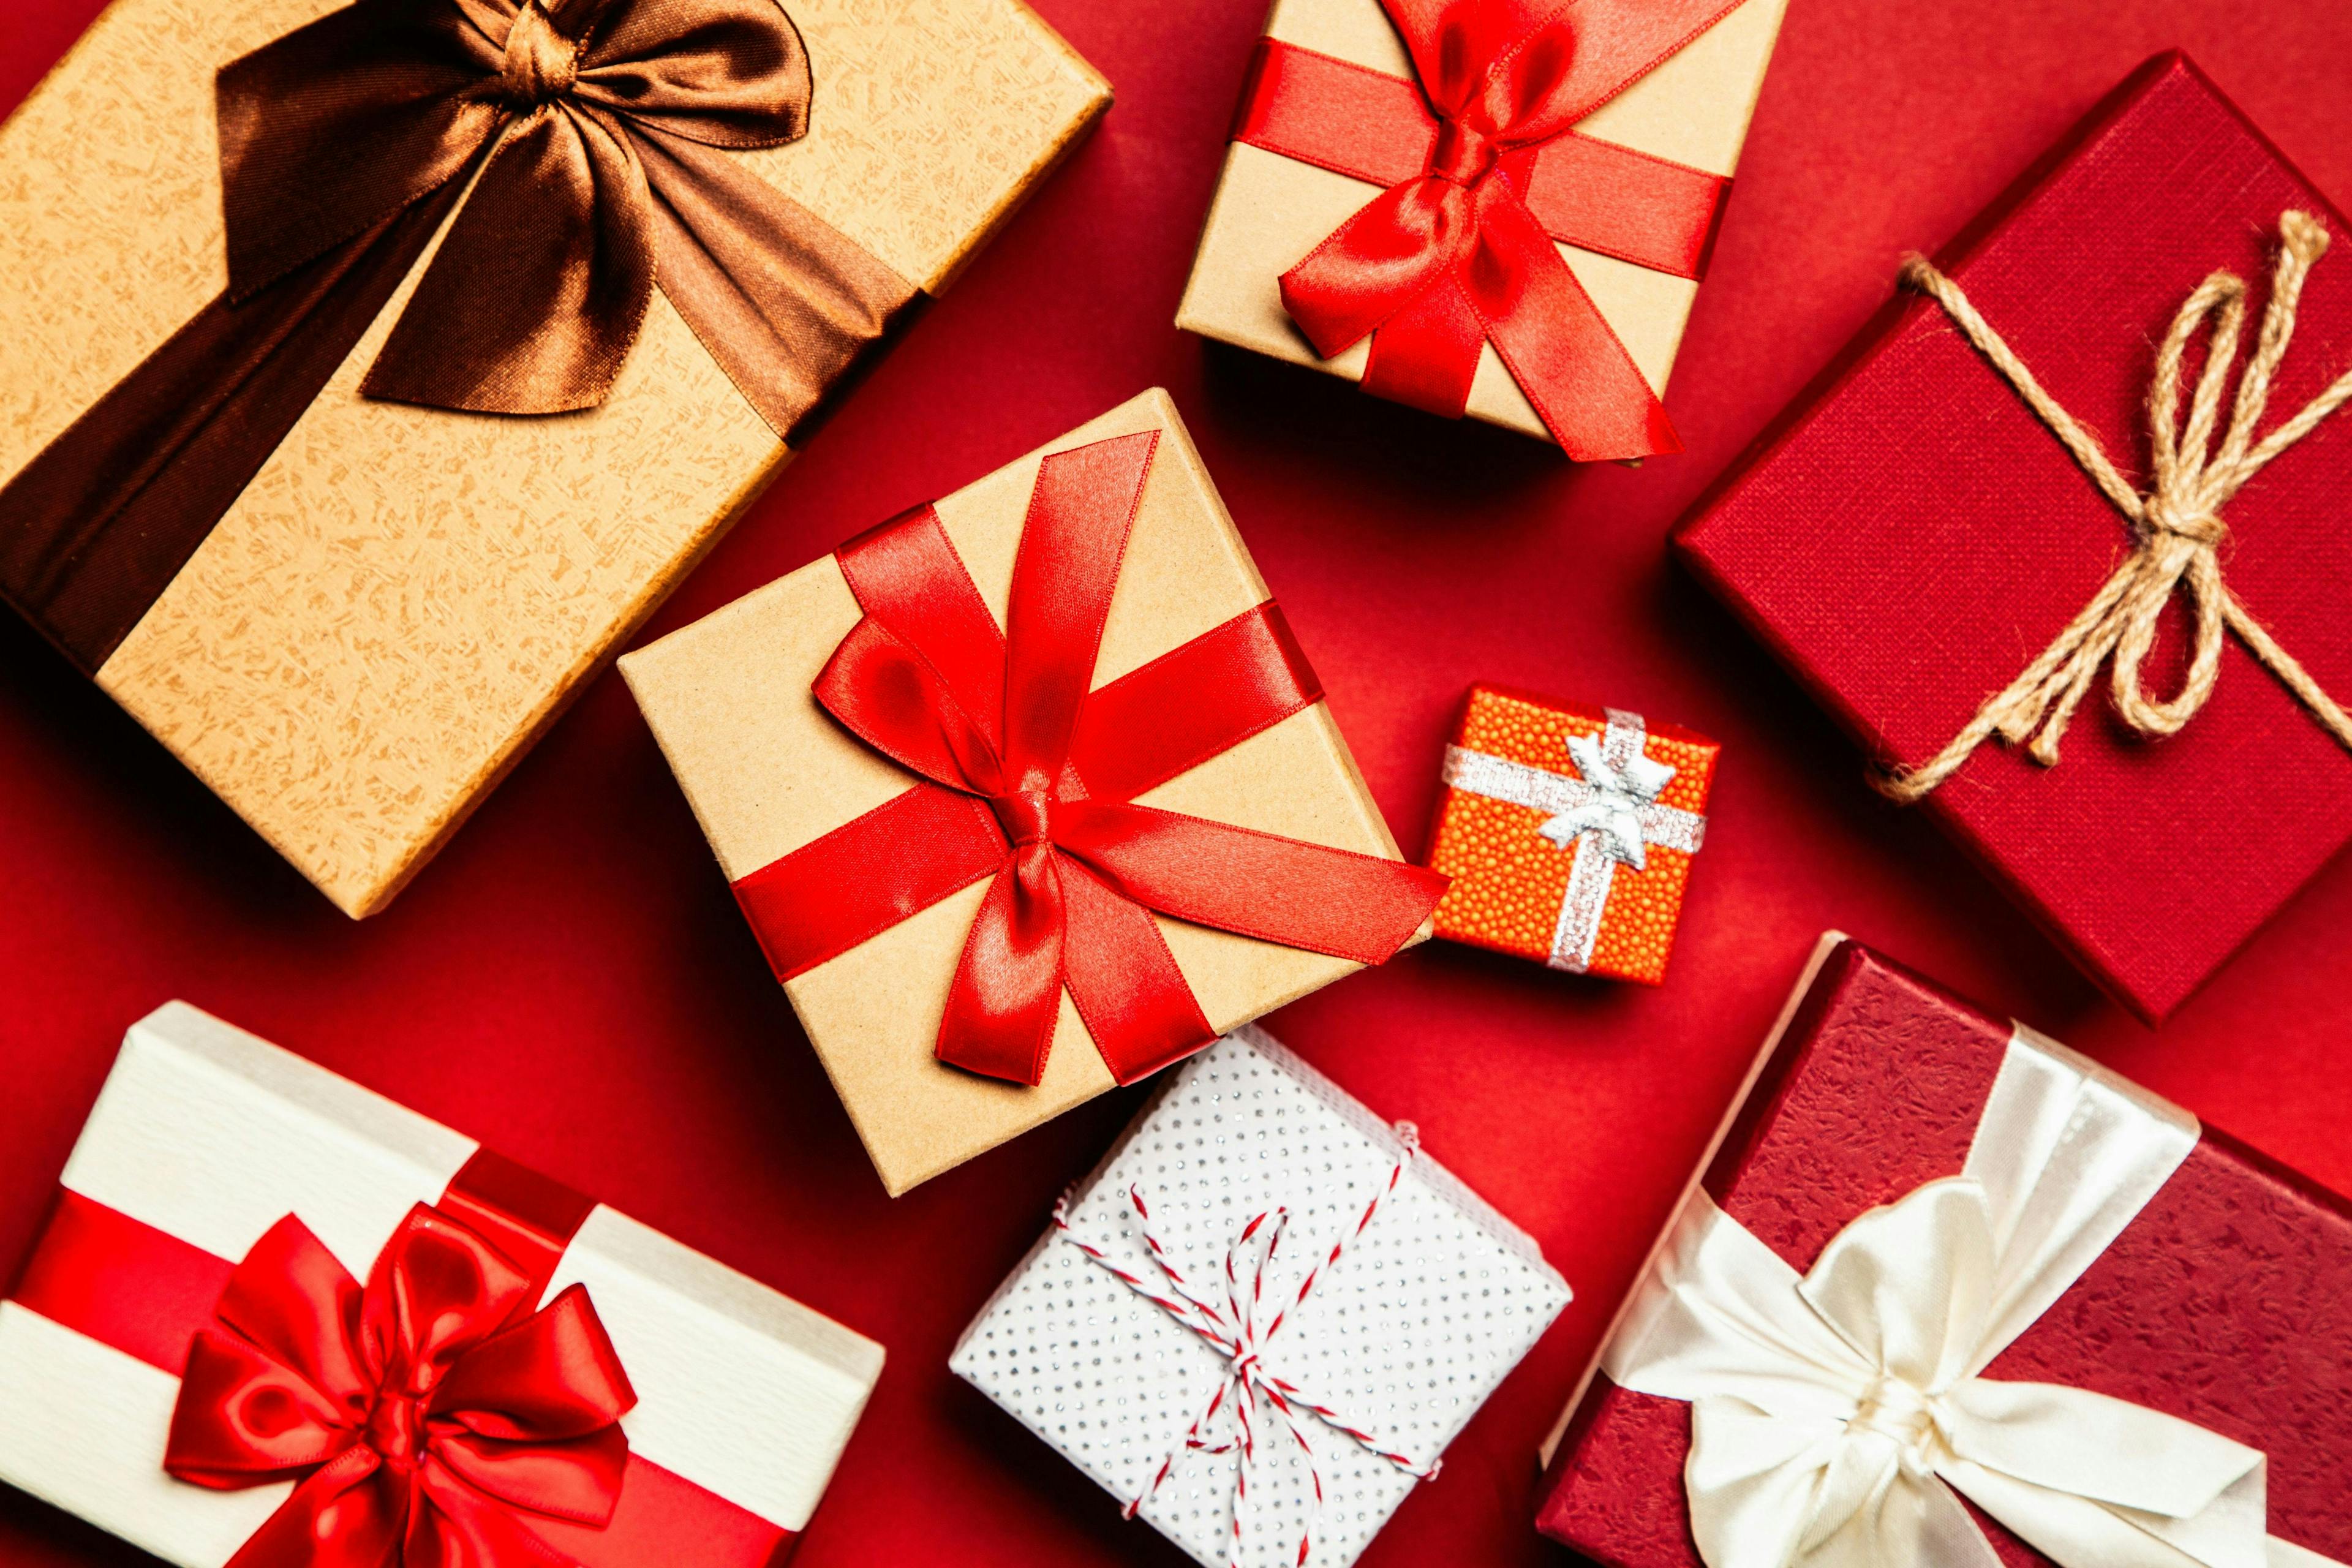 Gift boxes wrapped in various papers with colorful ribbons, arranged together on a red background.